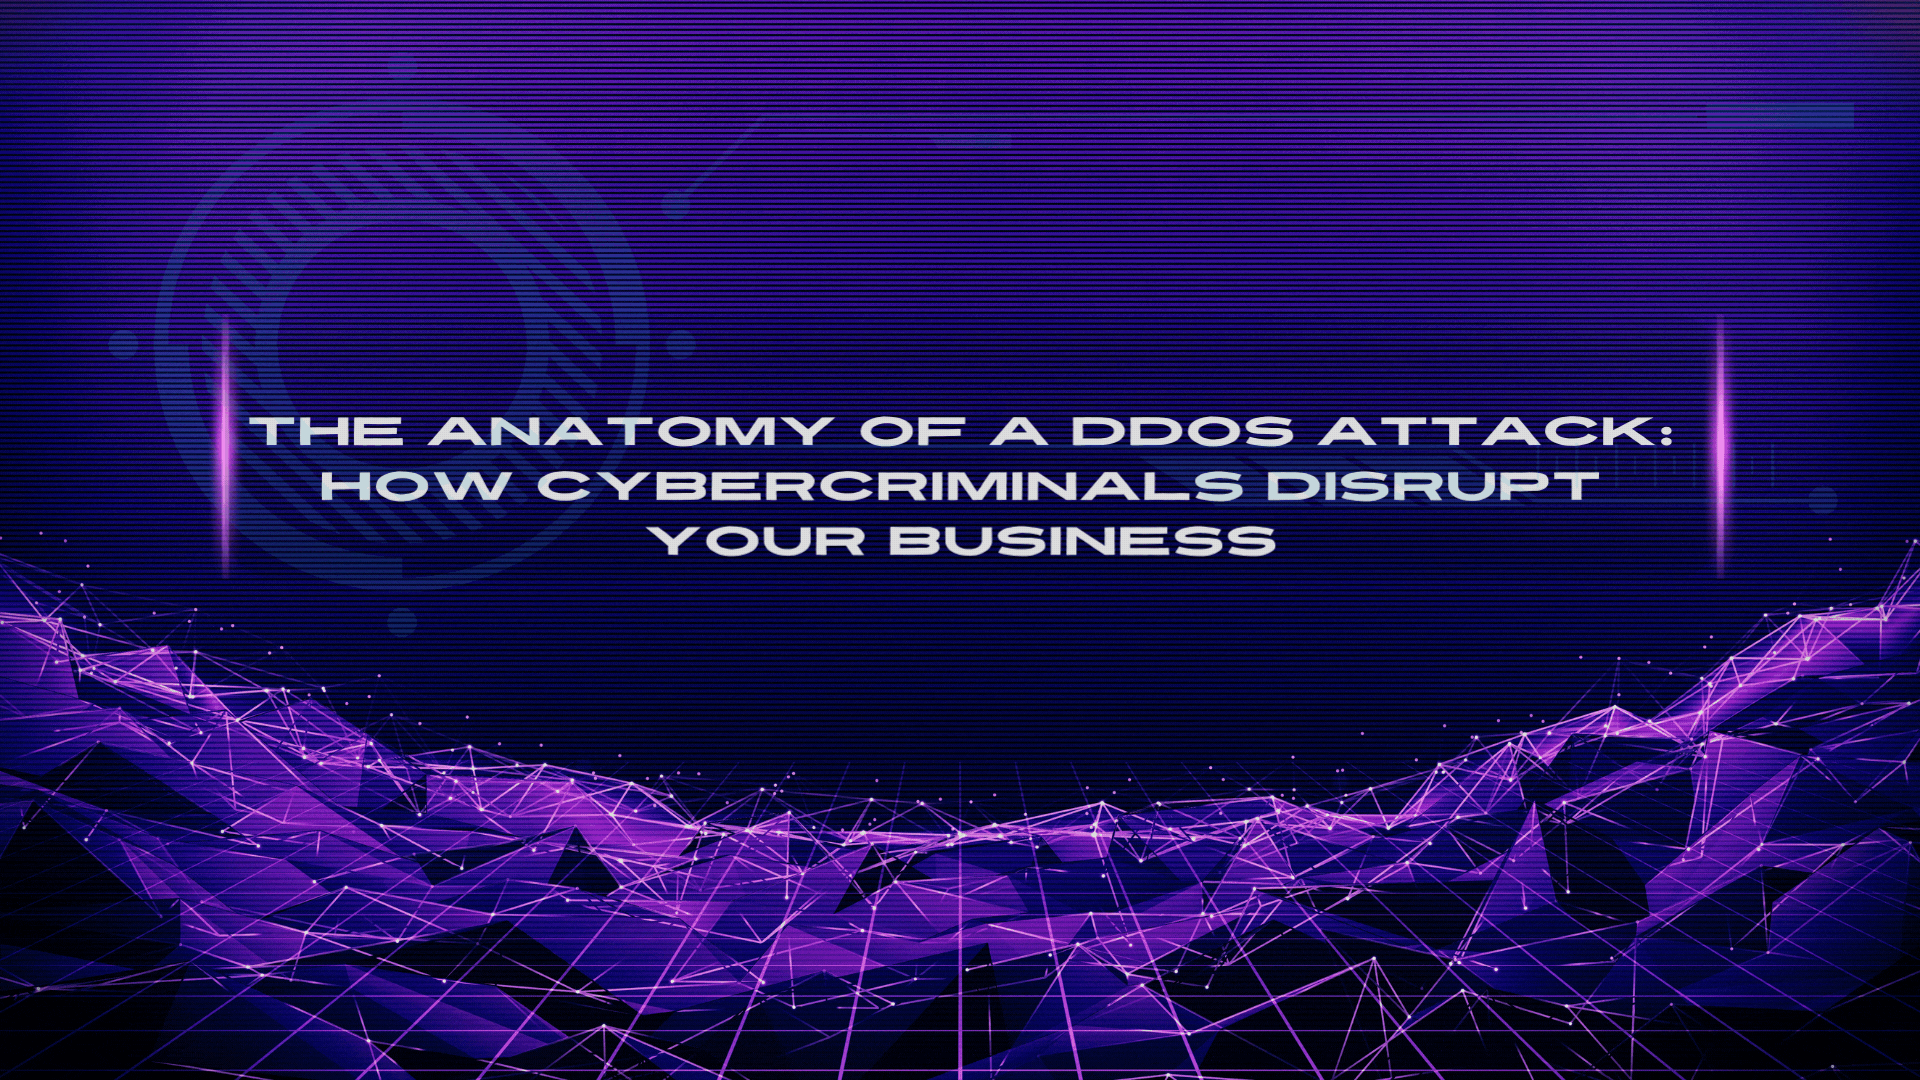 The Anatomy of a DDoS Attack How Cybercriminals Disrupt Your Business